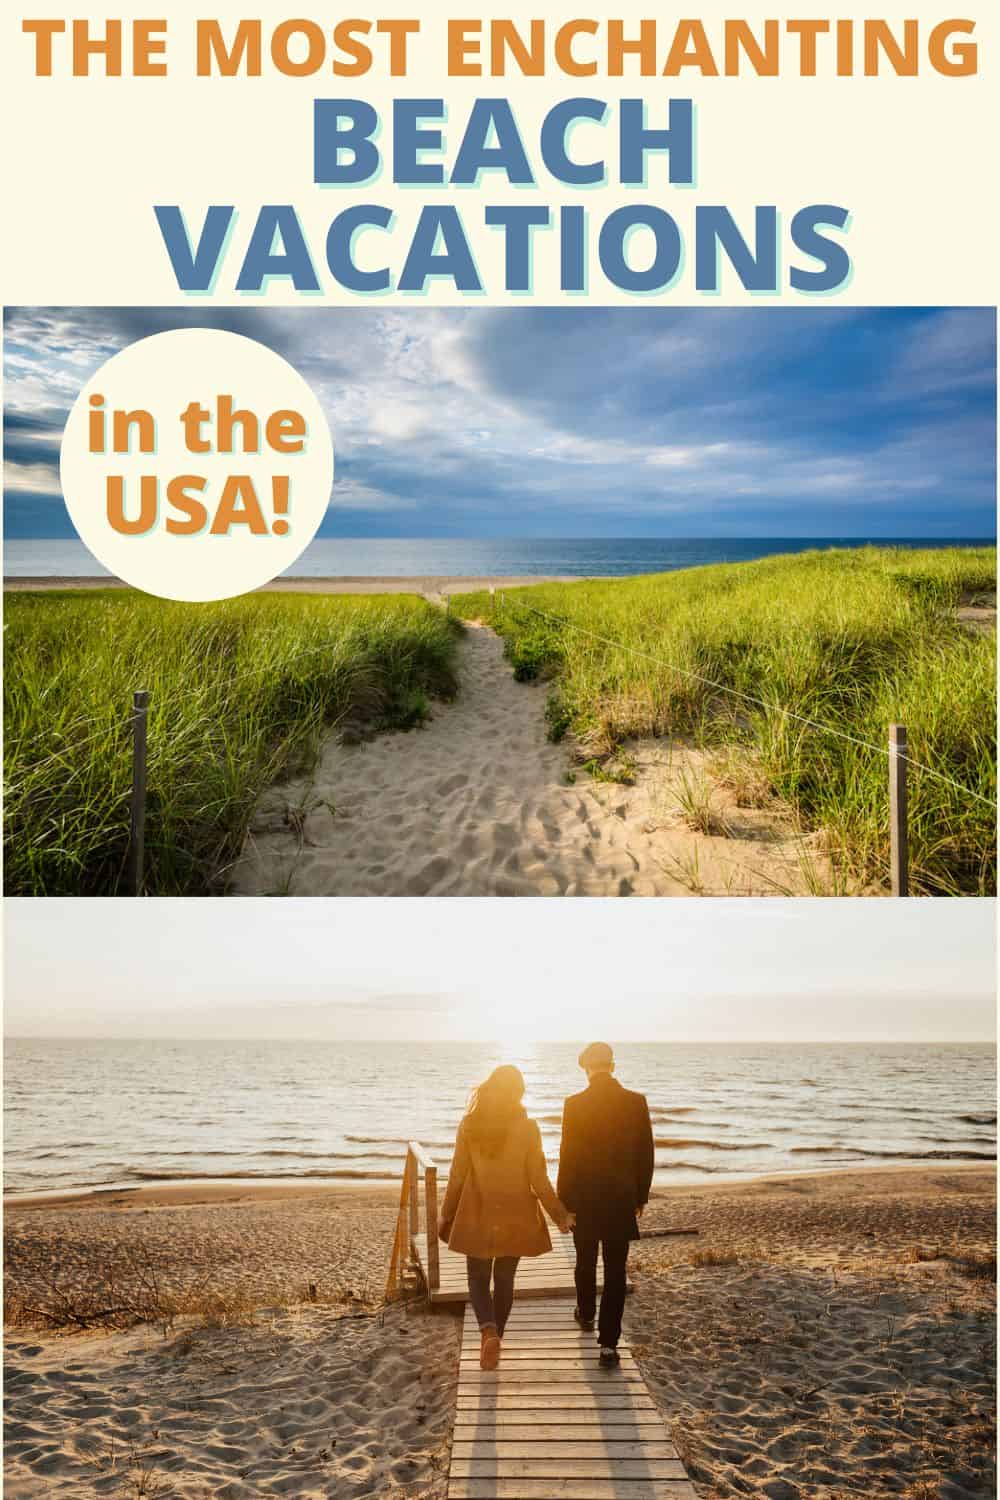 Two east coast beaches with text overlay: The most enchanting beach vacations in the USA.